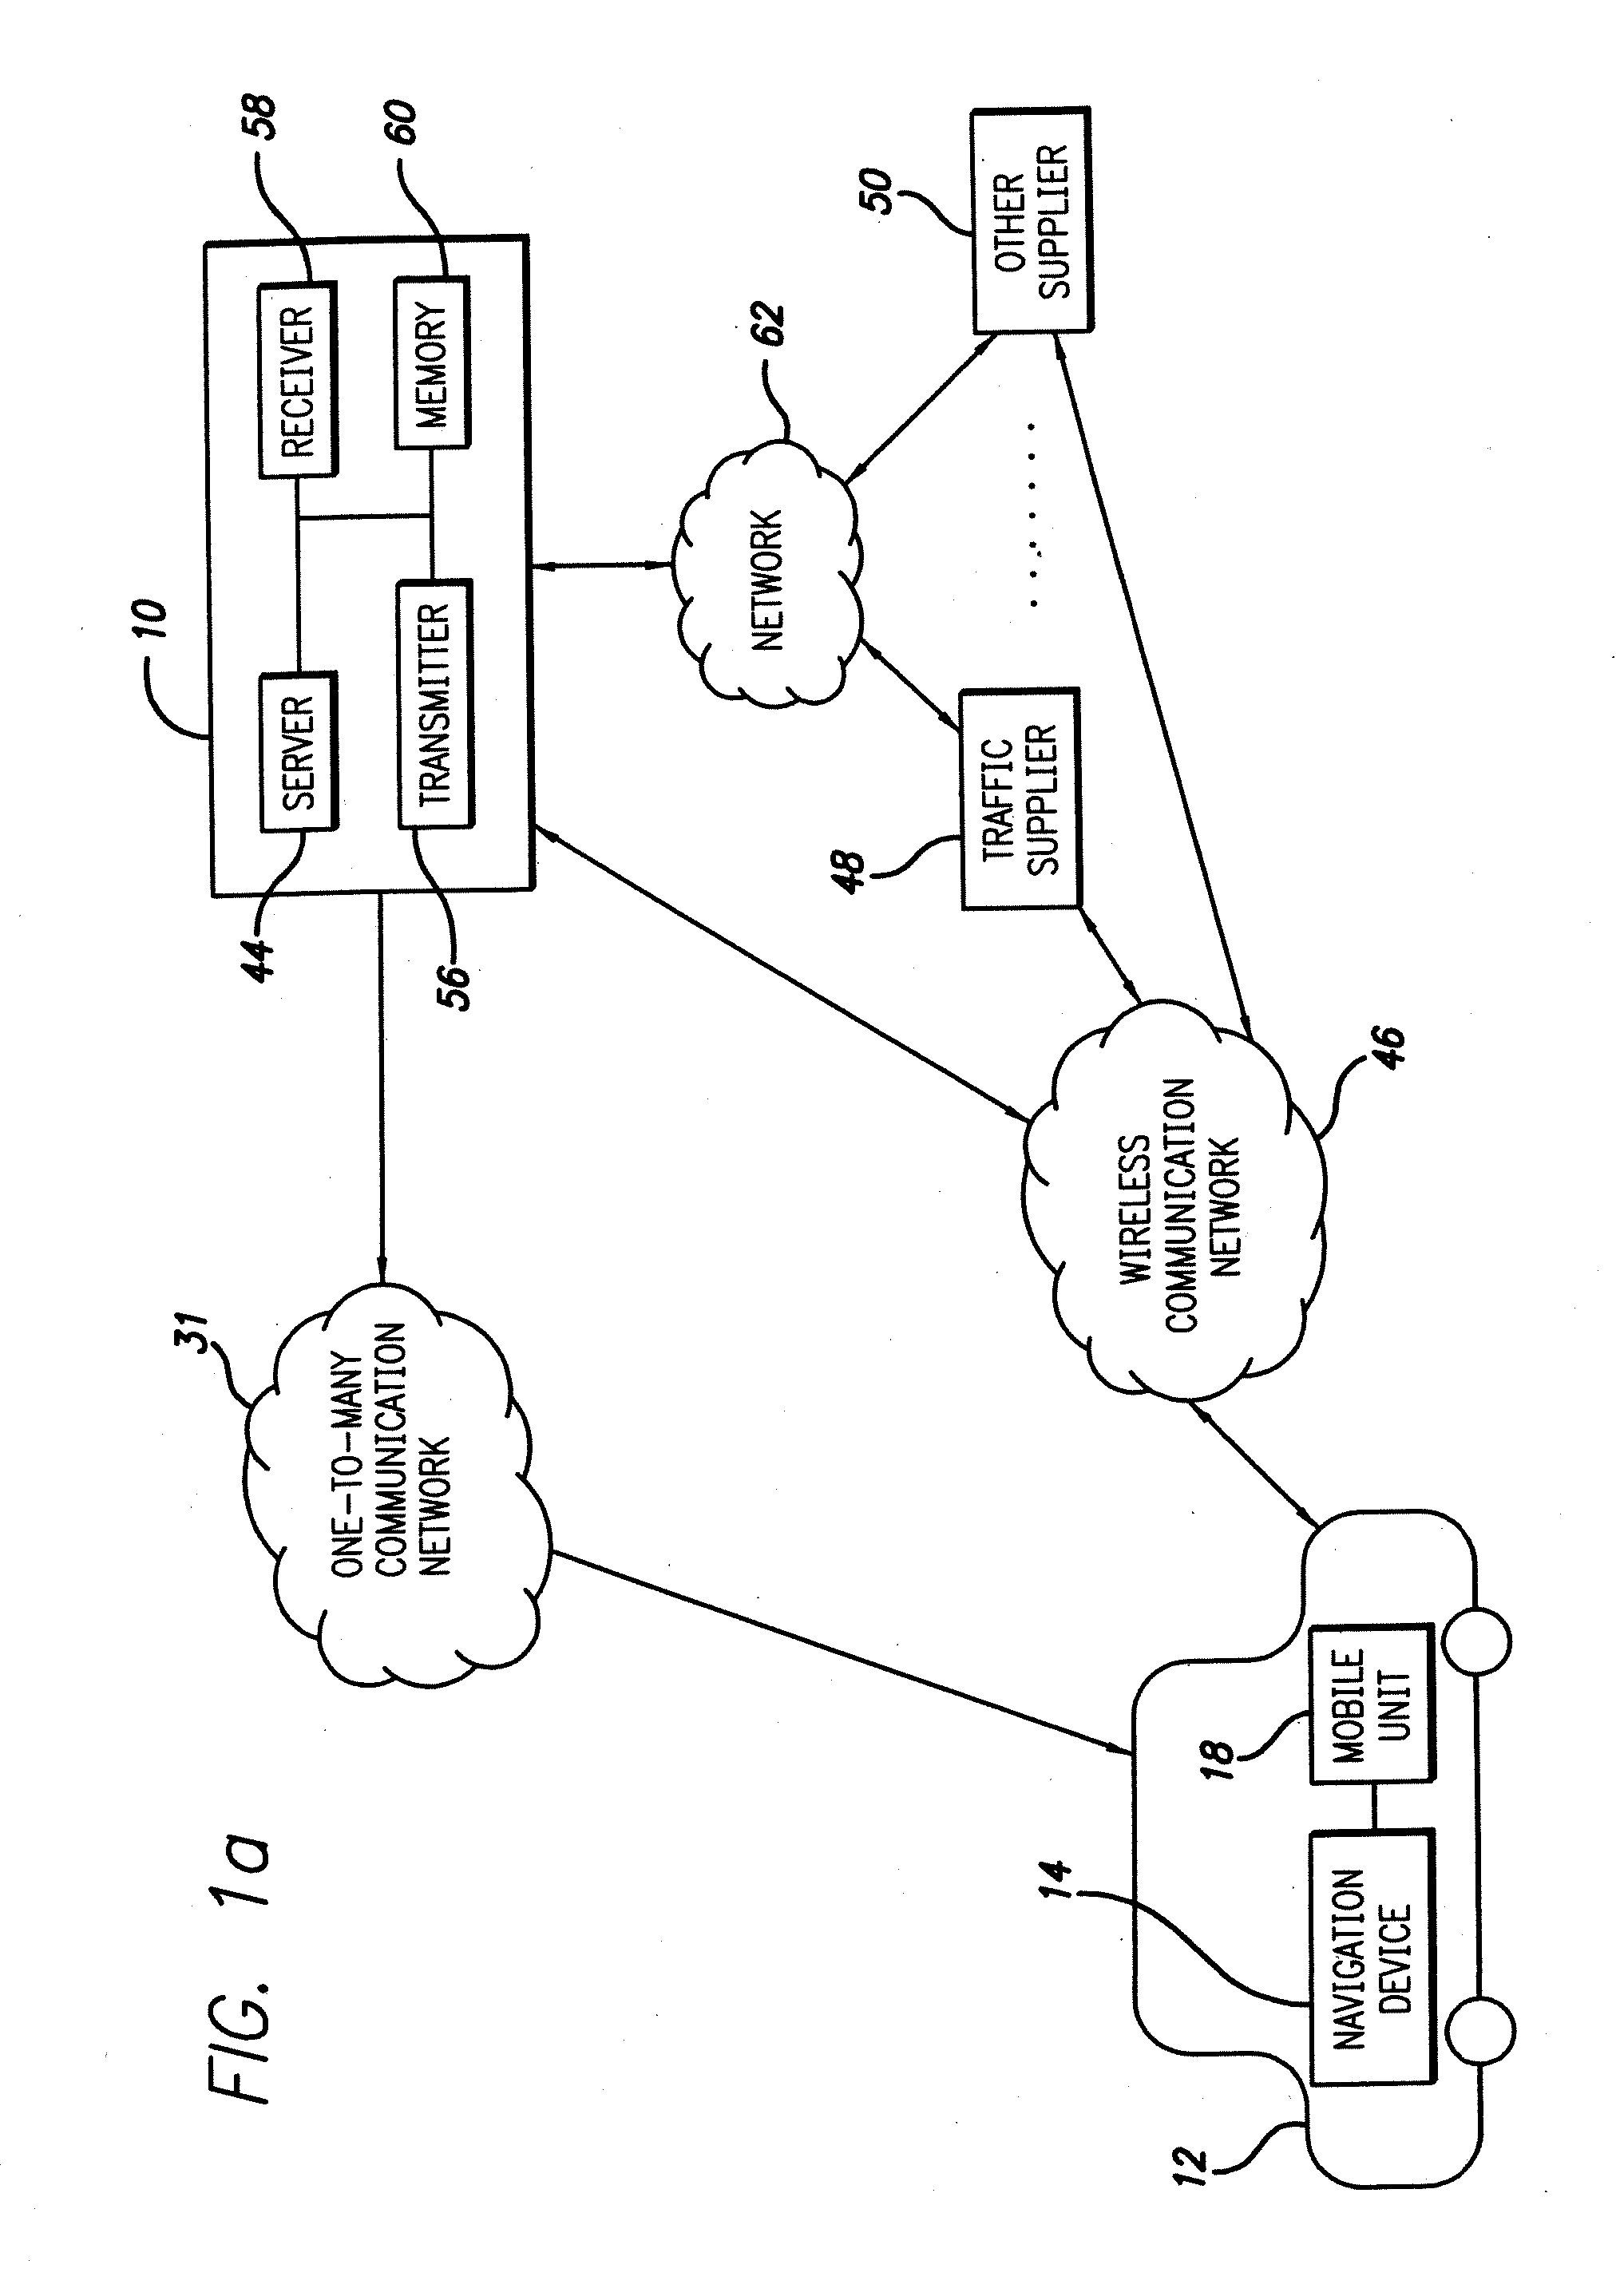 Method and system for using traffic flow data to navigate a vehicle to a destination